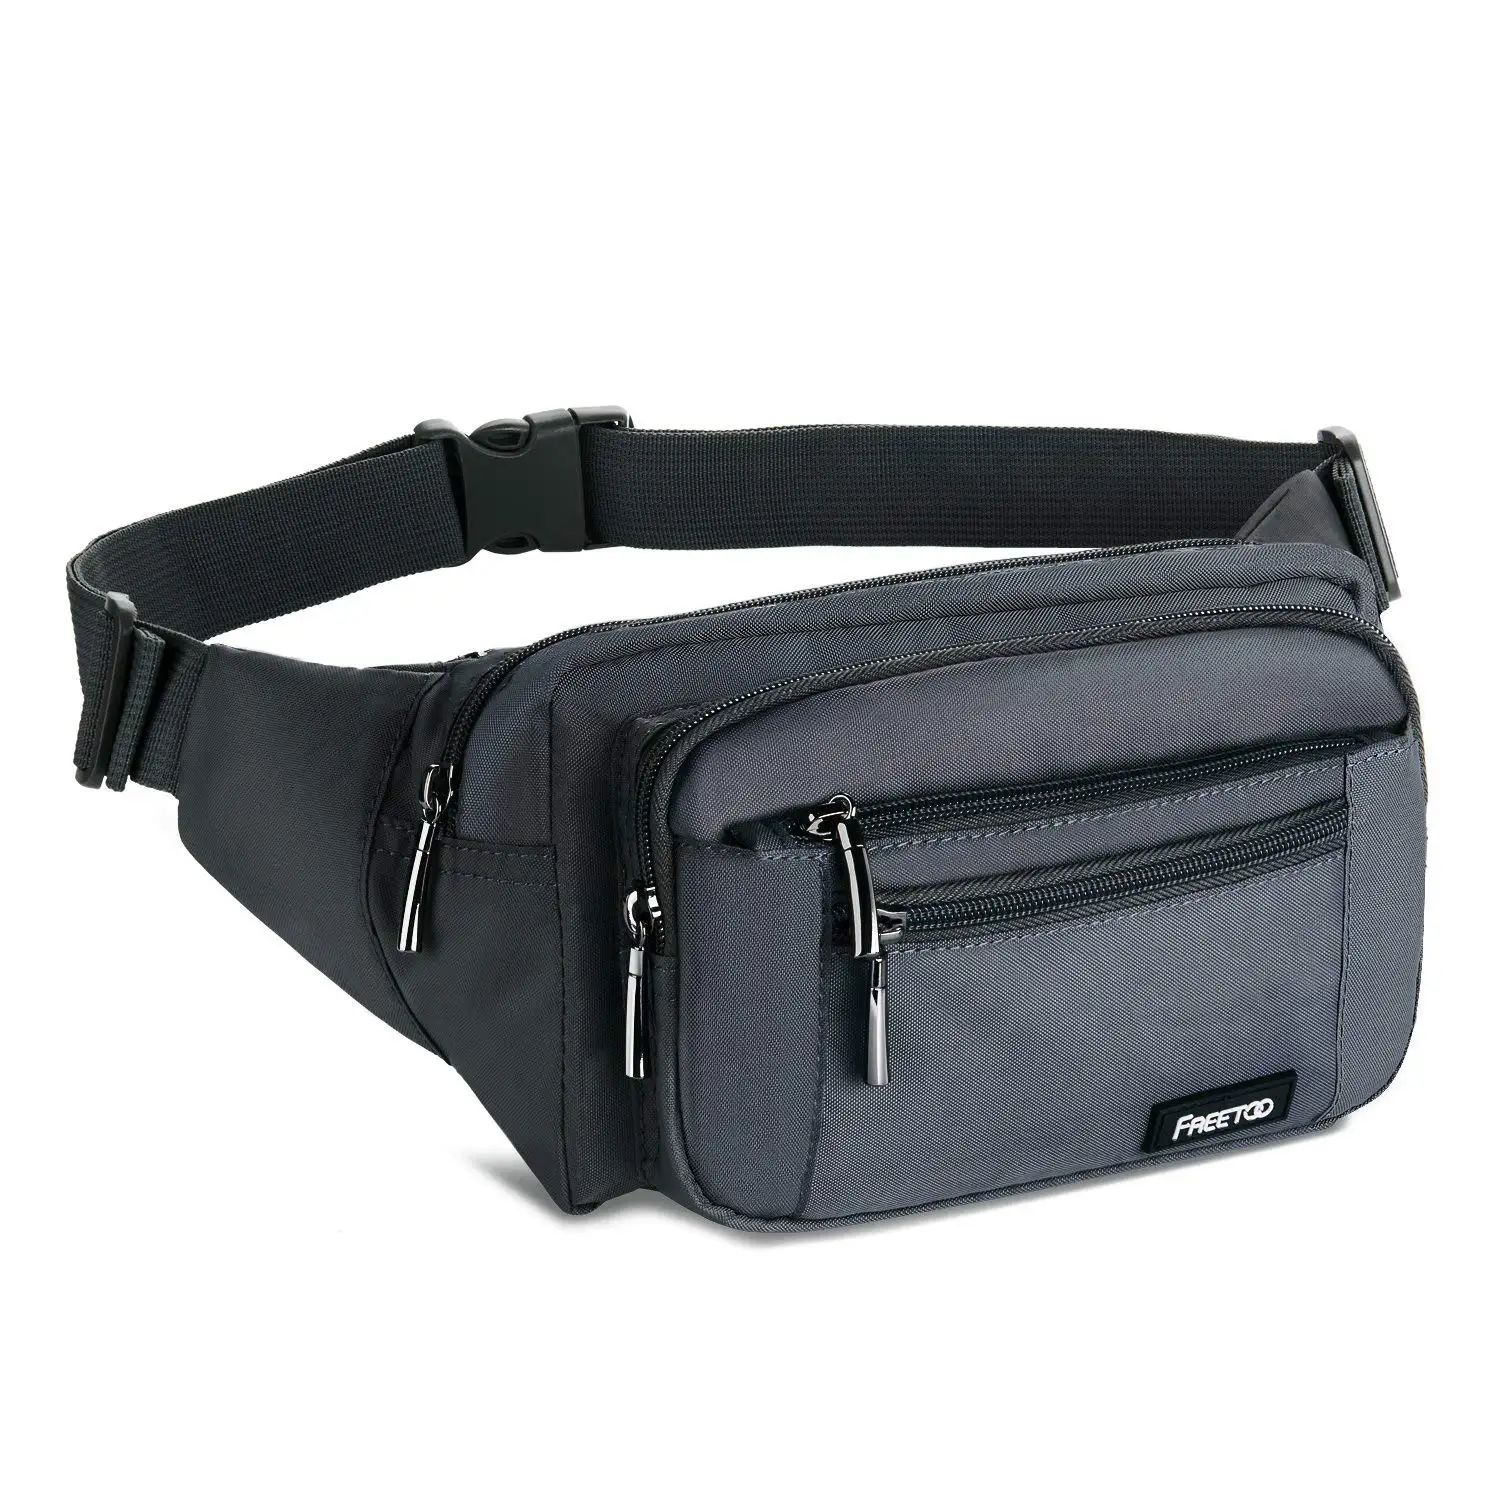 Cheap Fanny Pack With Leg Strap, find Fanny Pack With Leg Strap deals on line at 0